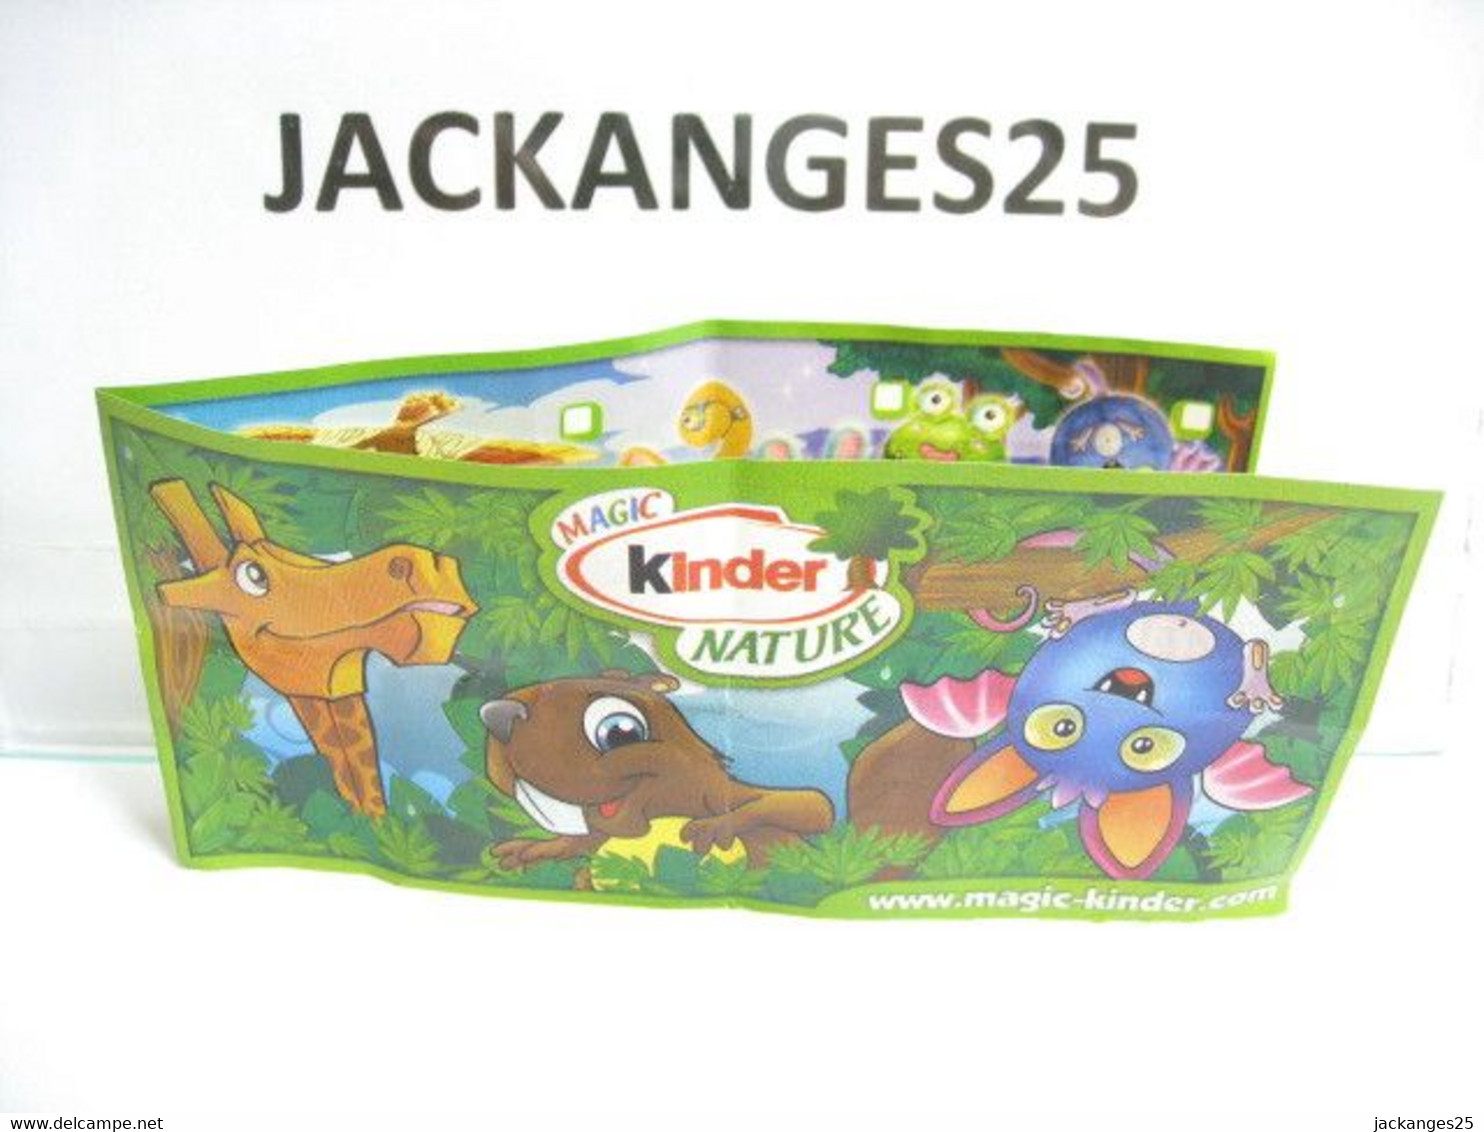 KINDER MPG UN 20 b TORTUE ANIMAUX NATURE NATOONS TIERE 2010  2011 + BPZ b NATURE